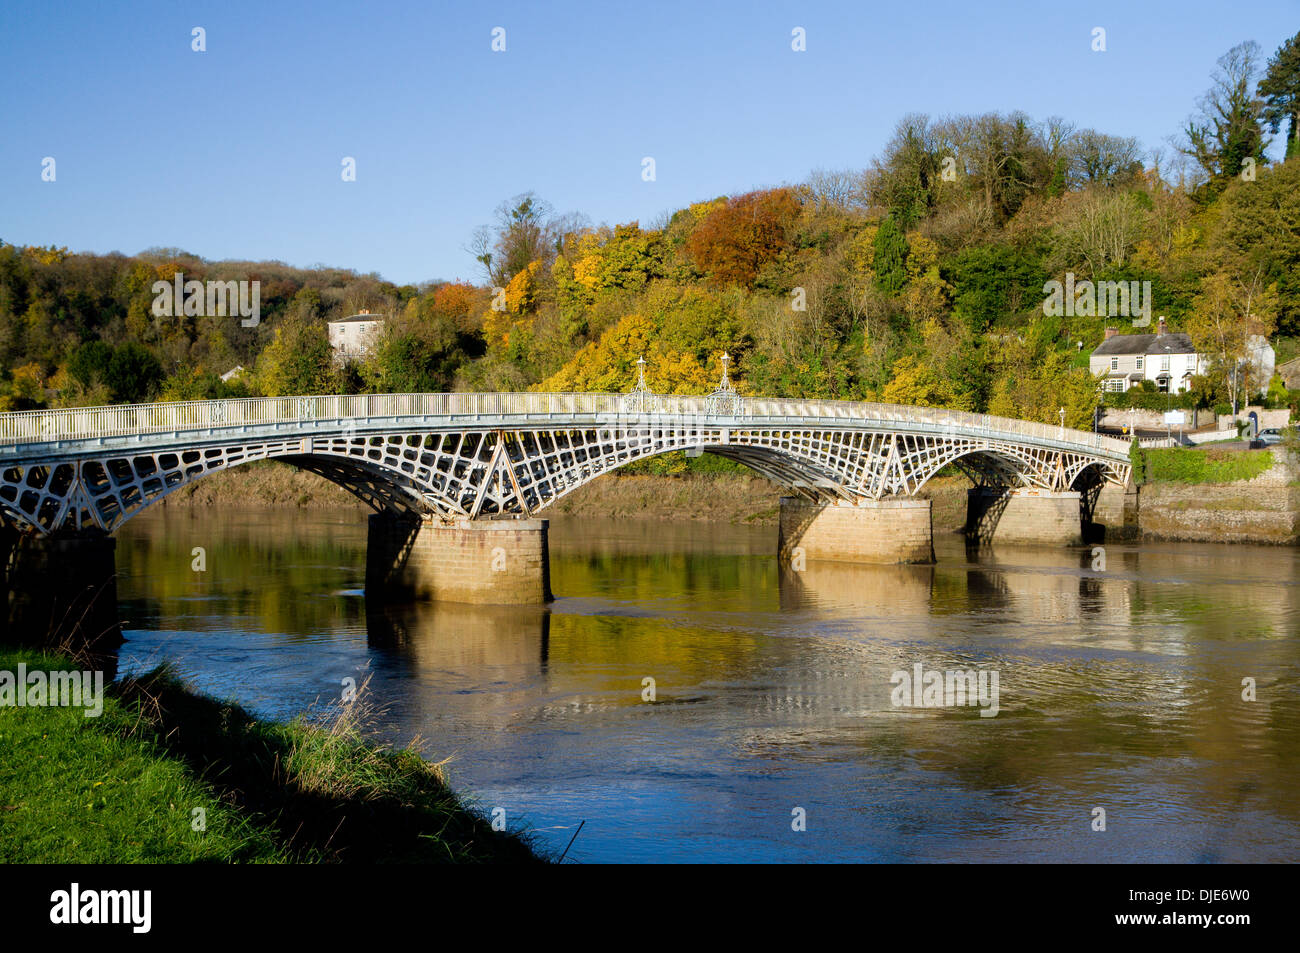 Chepstow Bridge and River Wye, Chepstow, Monmouthshire, South Wales. Stock Photo